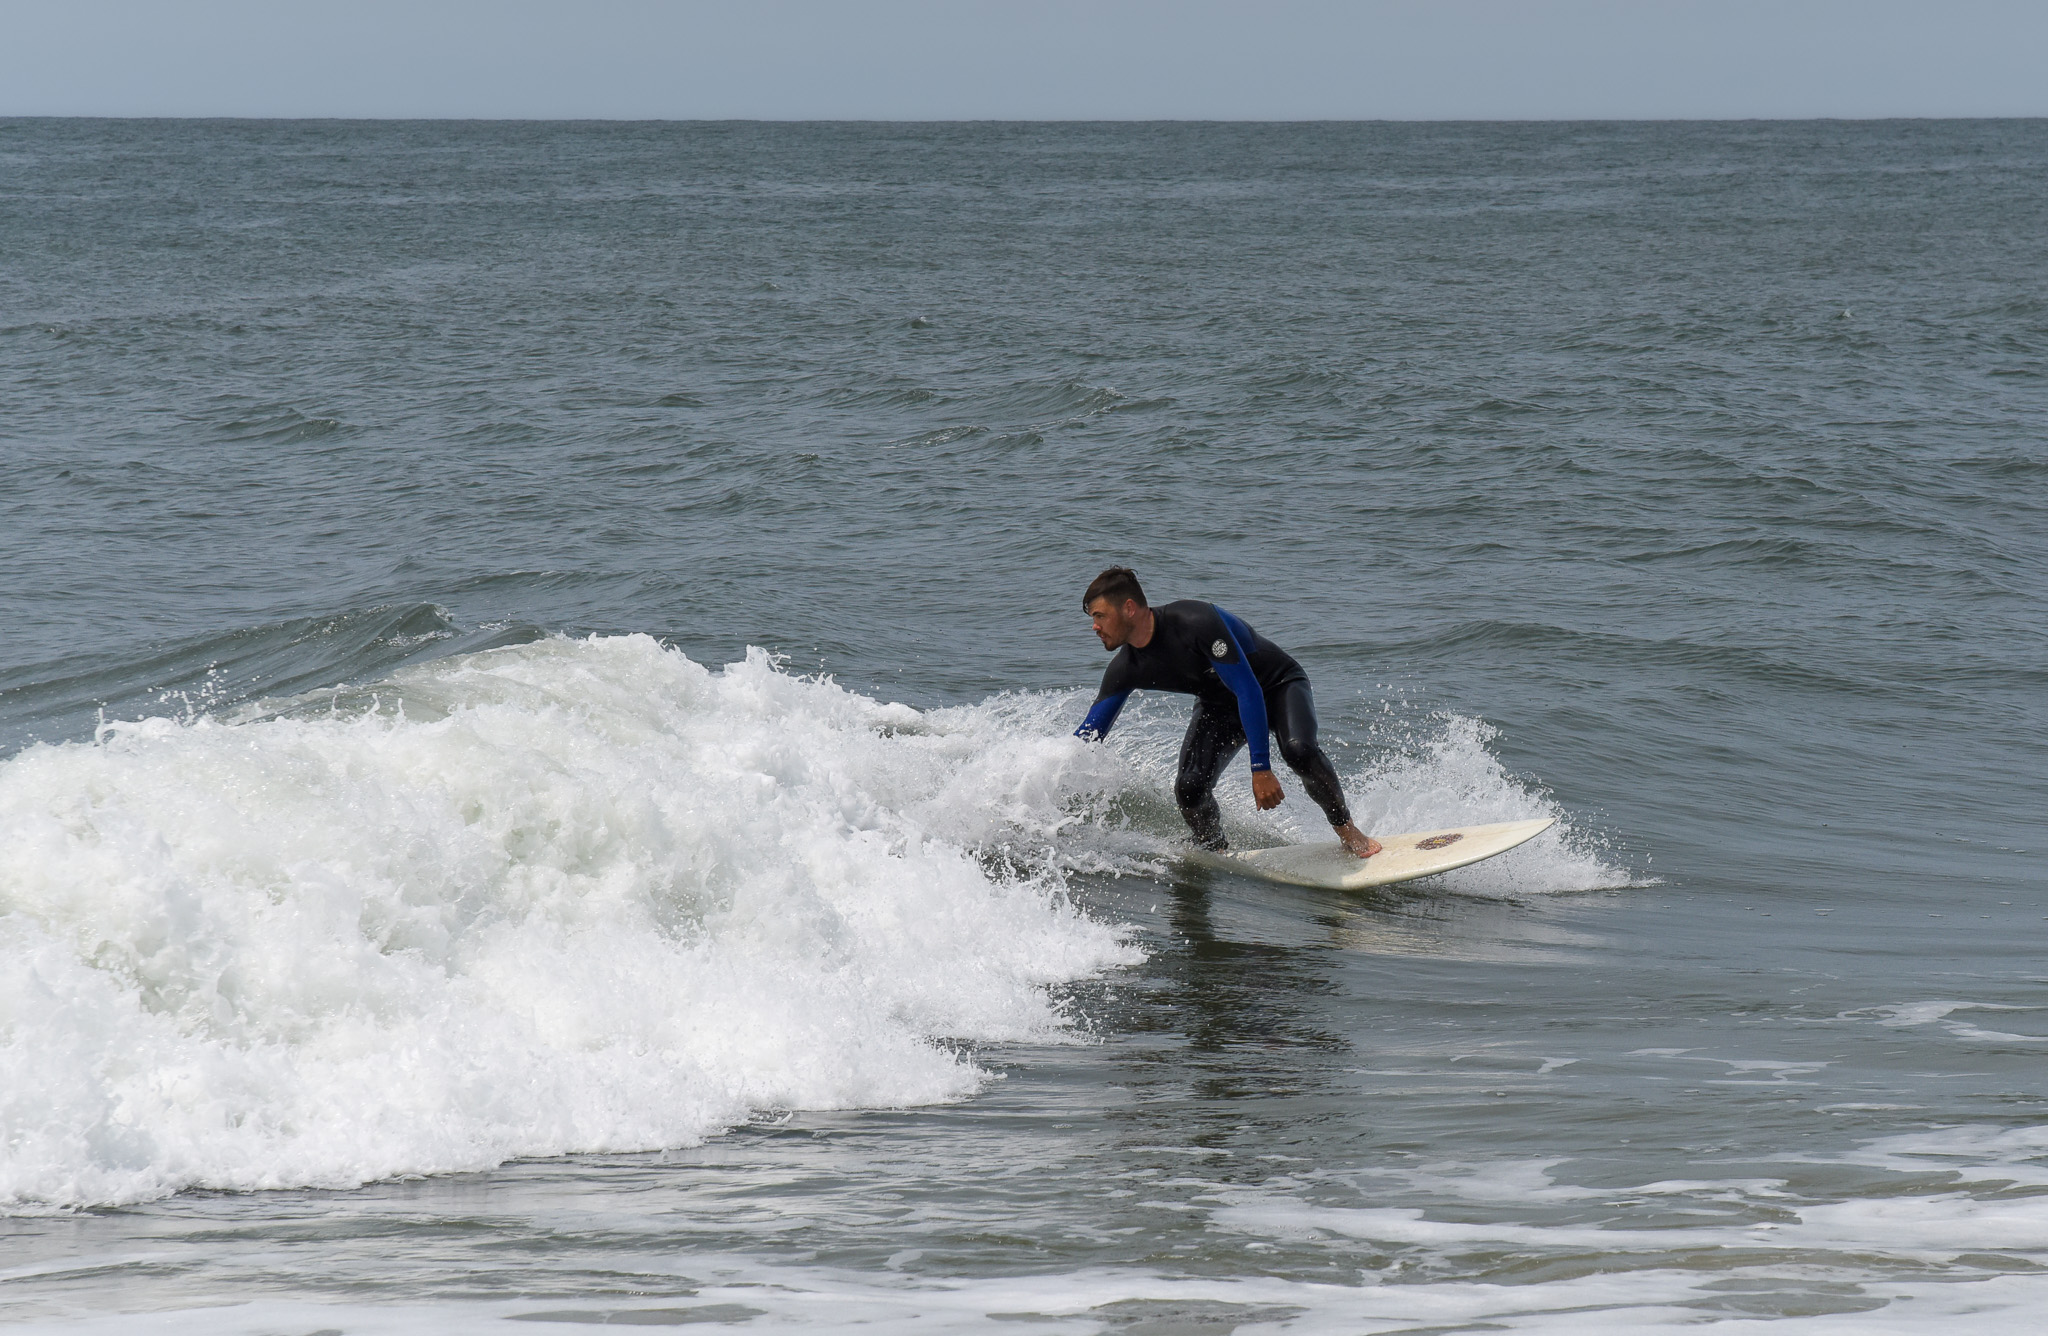 This Guy found the Perfect Cape May Wave to surf.